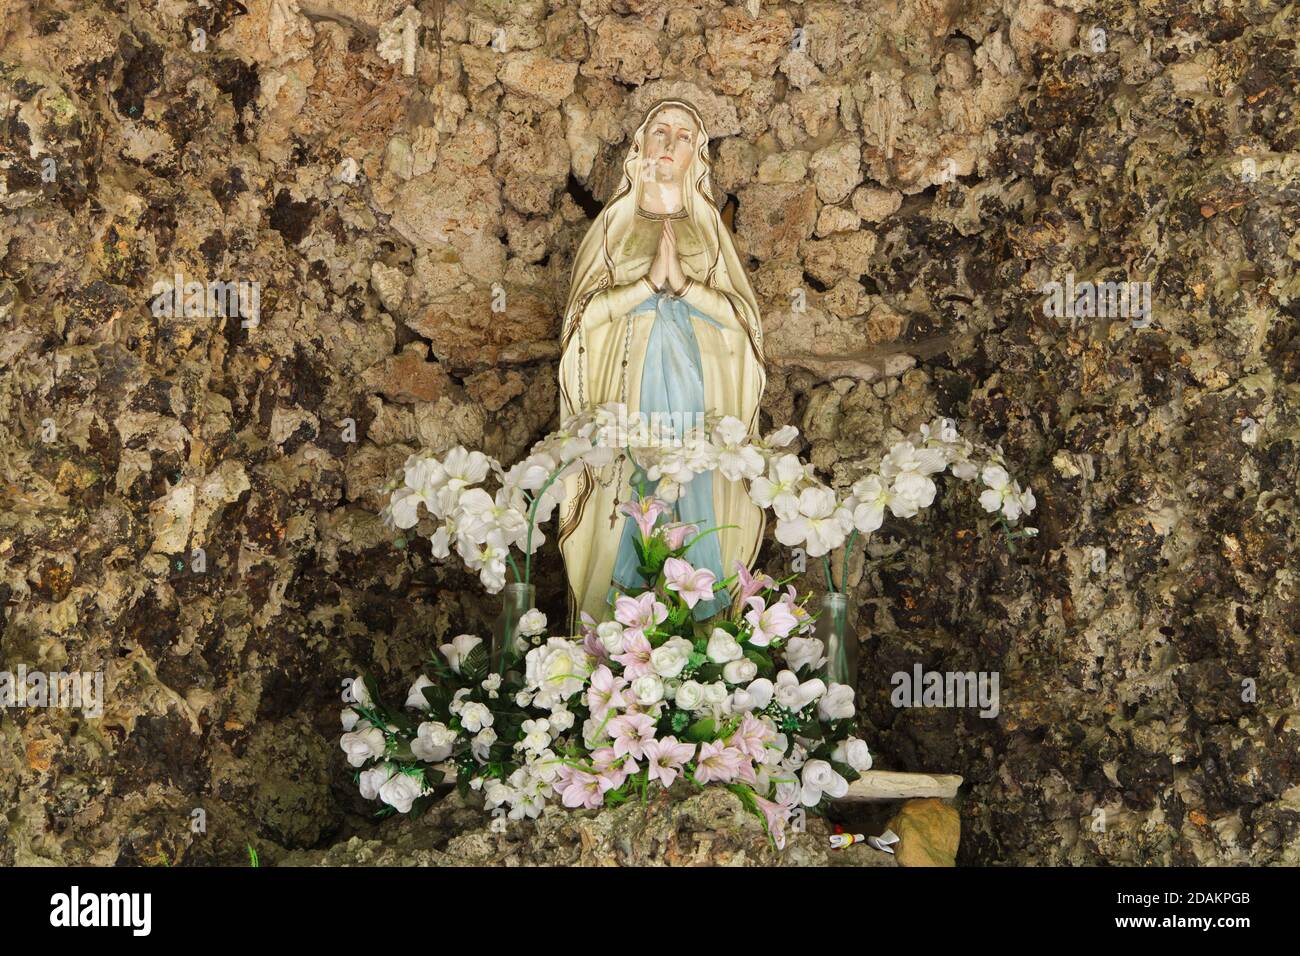 Statue of Our Lady of Lourdes on the main altar in the rock chapel in the Modlivý důl (Praying Valley) near Svojkov in the Lusatian Mountains in North Bohemia, Czech Republic. The rock chapel is devoted to Our Lady of Lourdes. Stock Photo